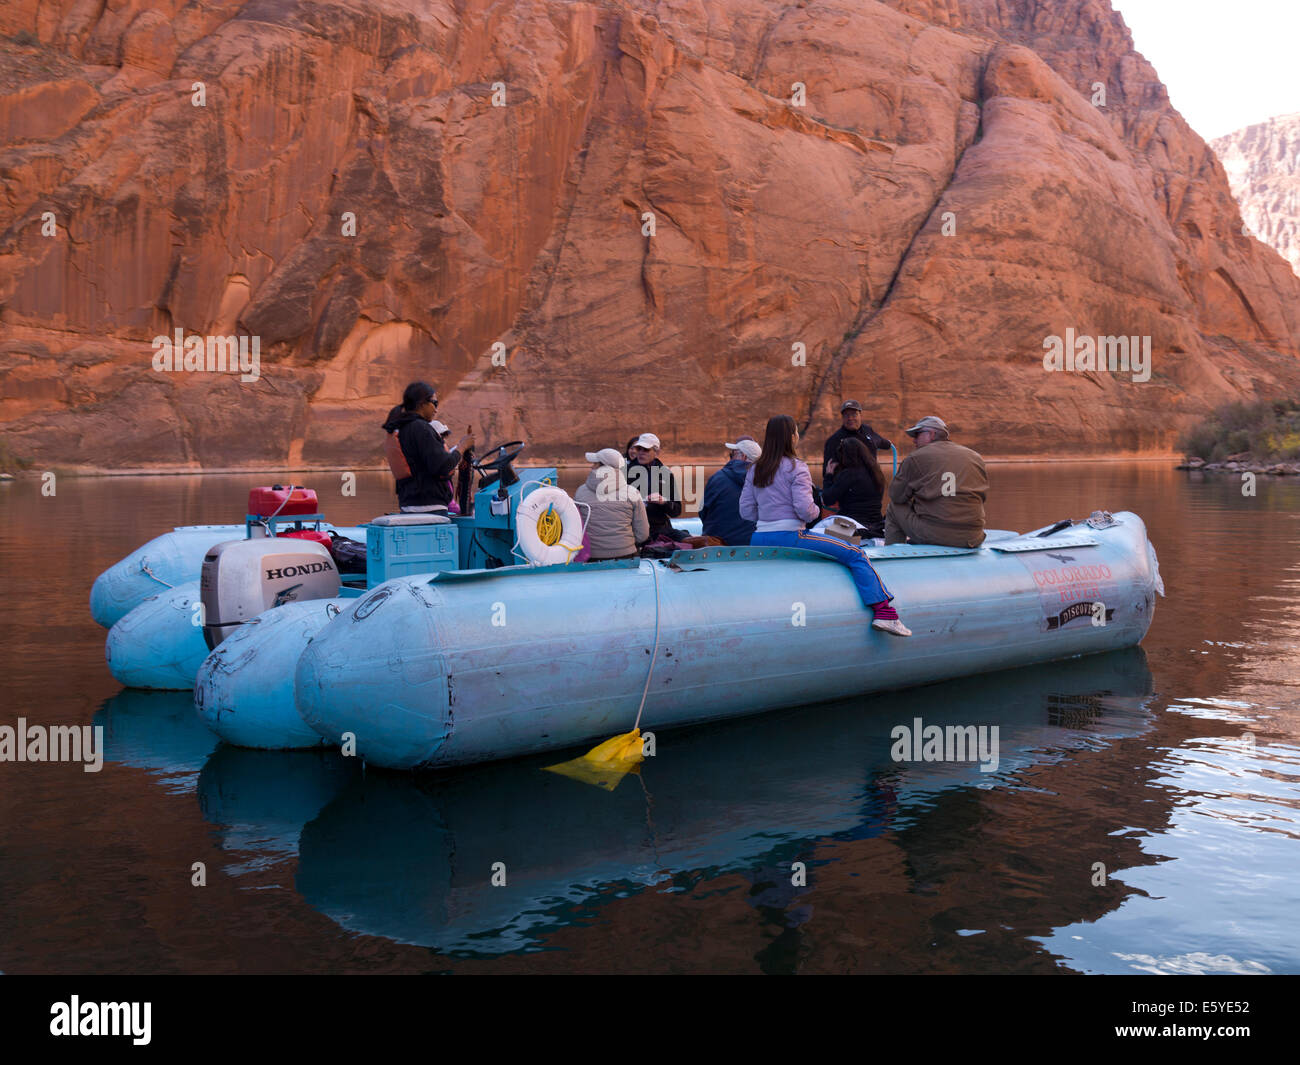 Tourists on a rafter in a river, Colorado River, Glen Canyon National Recreation Area, Arizona-Utah, USA Stock Photo